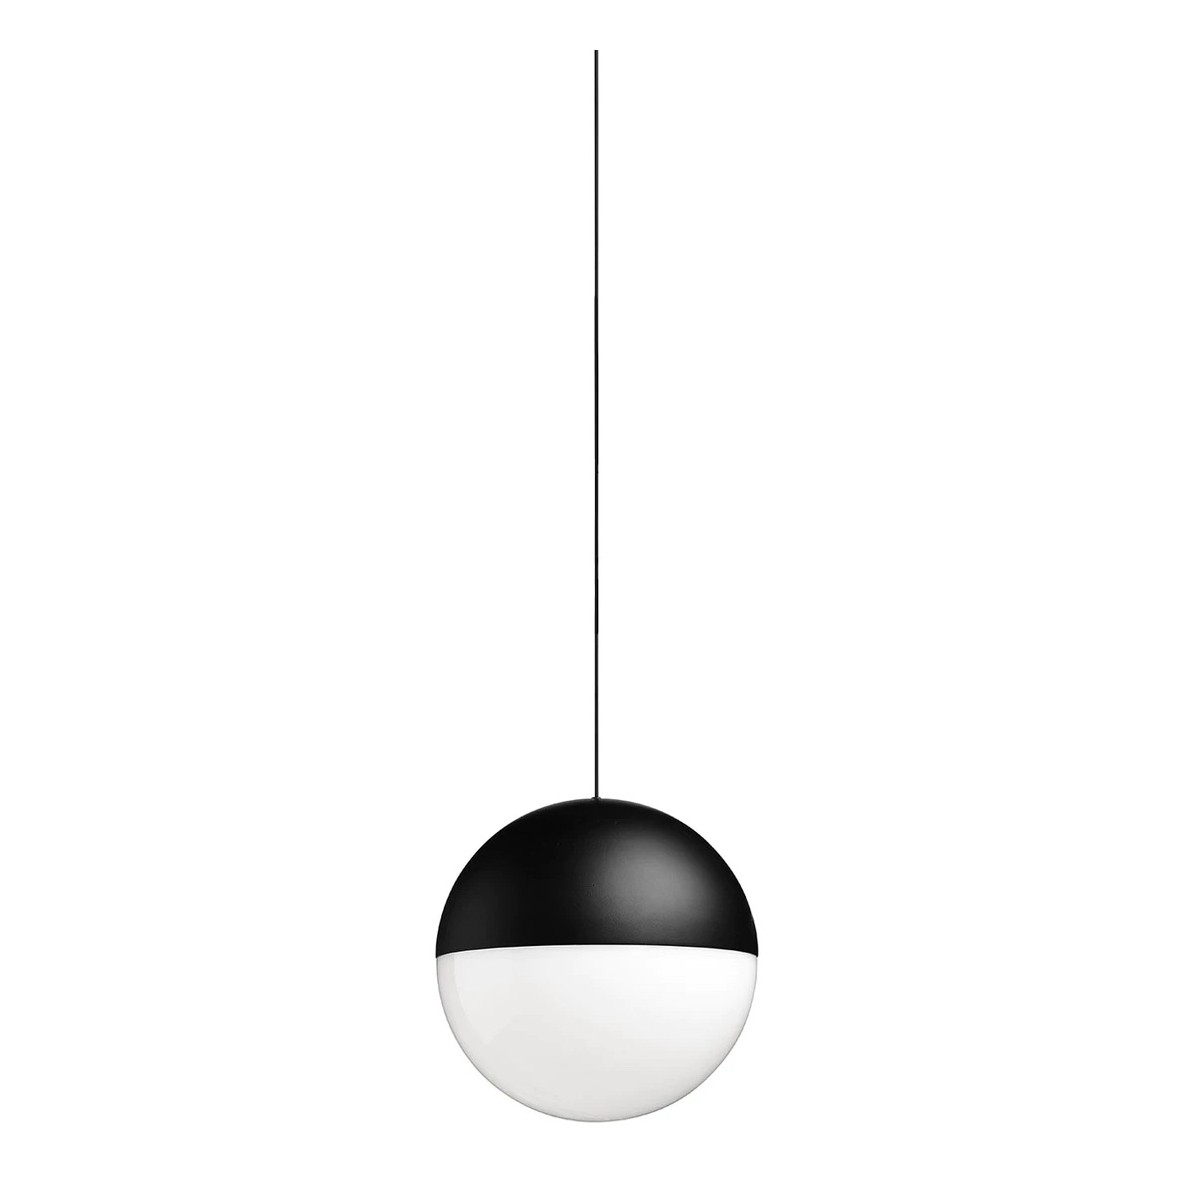 copy of black cone - touch dimmer - String Light